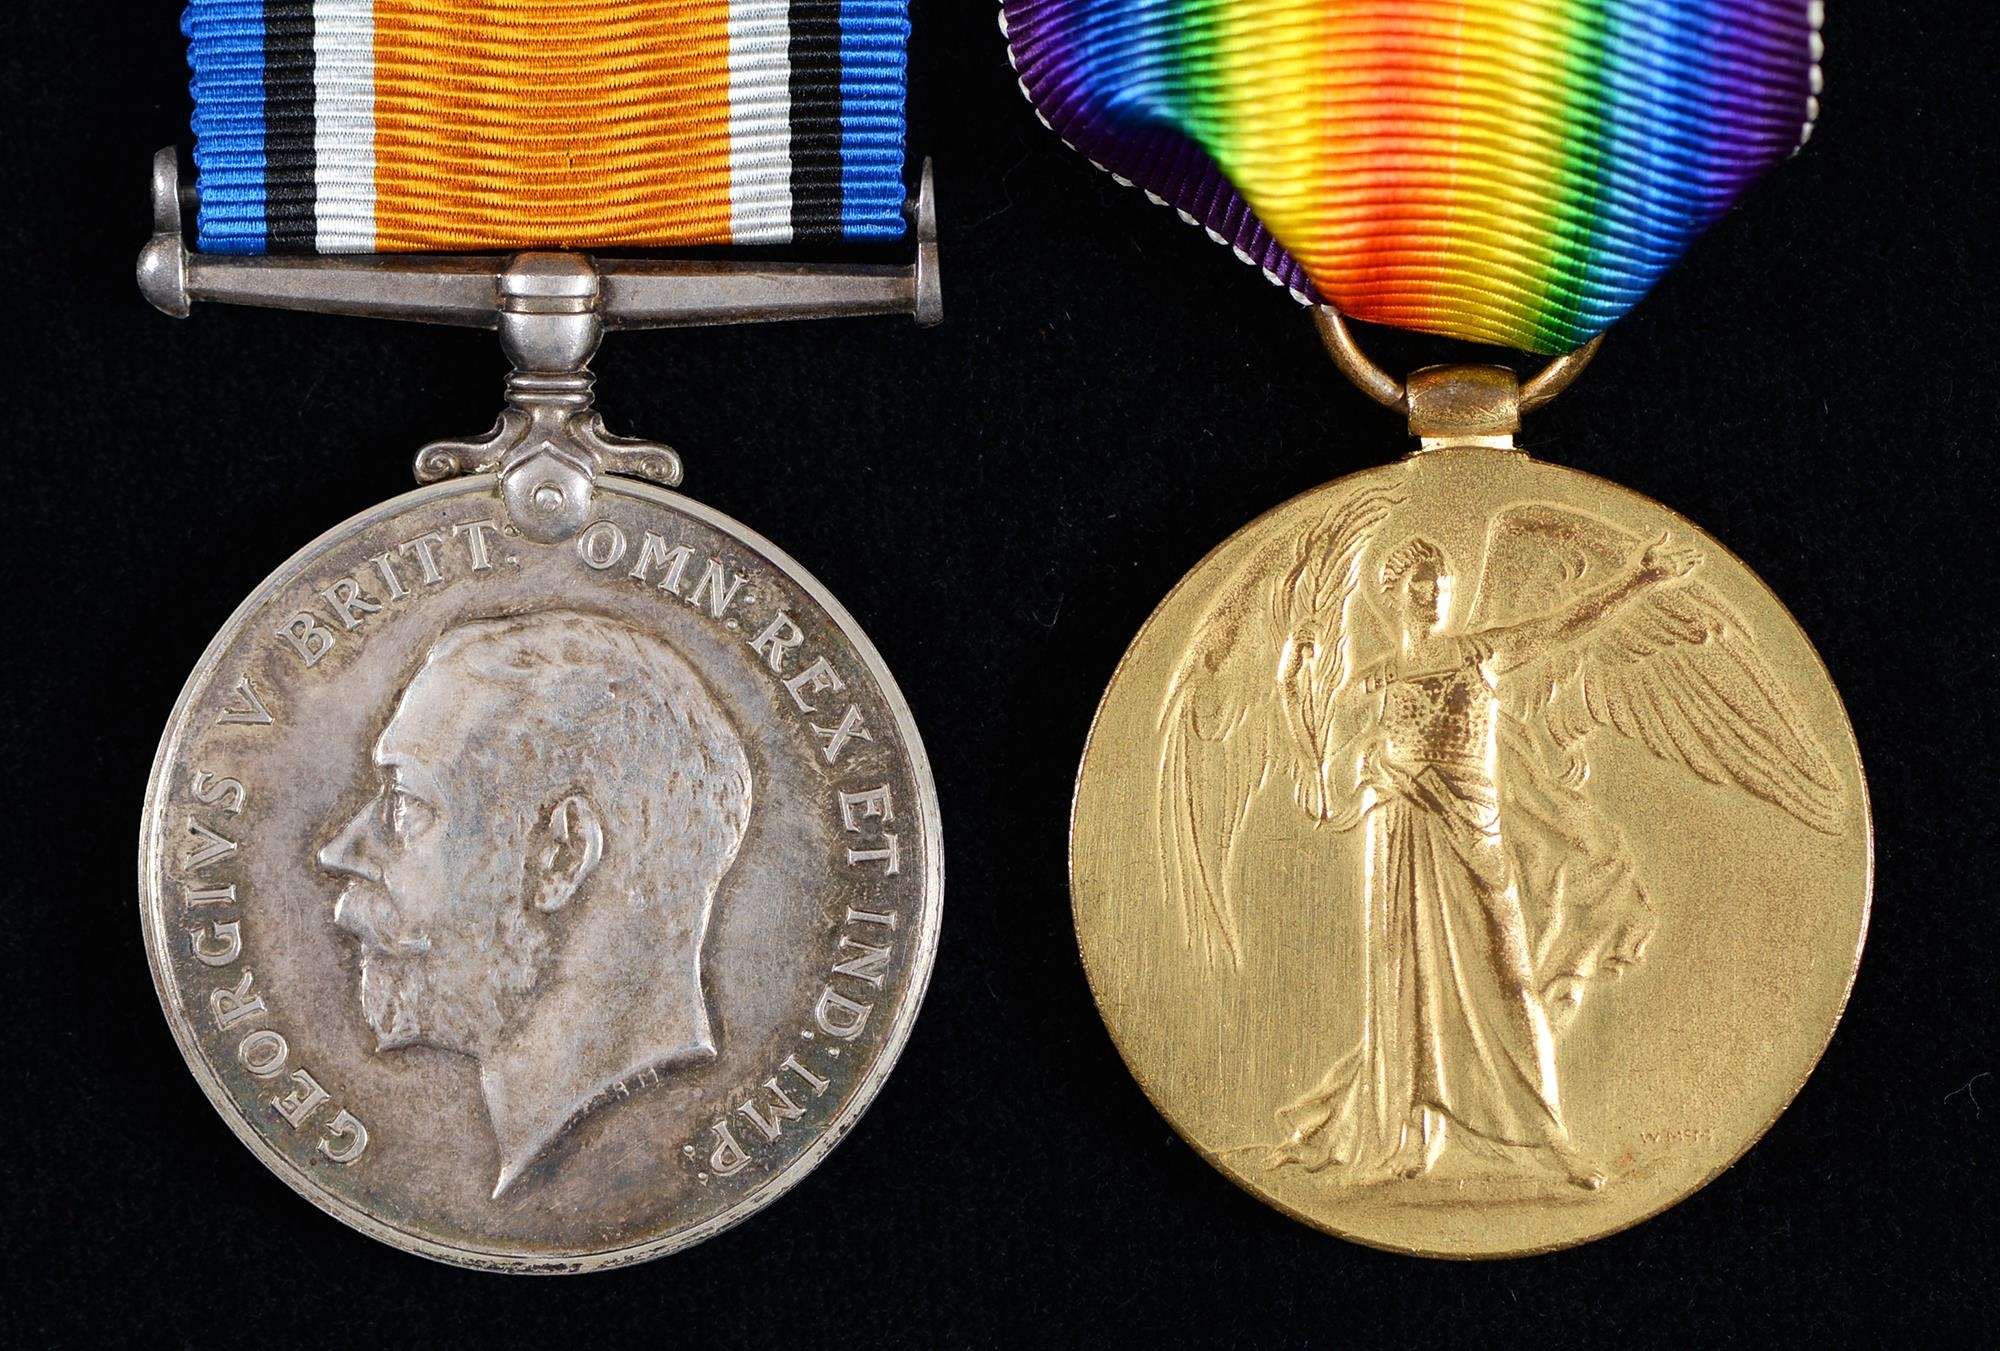 WWI pair, British War Medal and Victory Medal G-98171 Pte F Rossel Midd'x R Condition